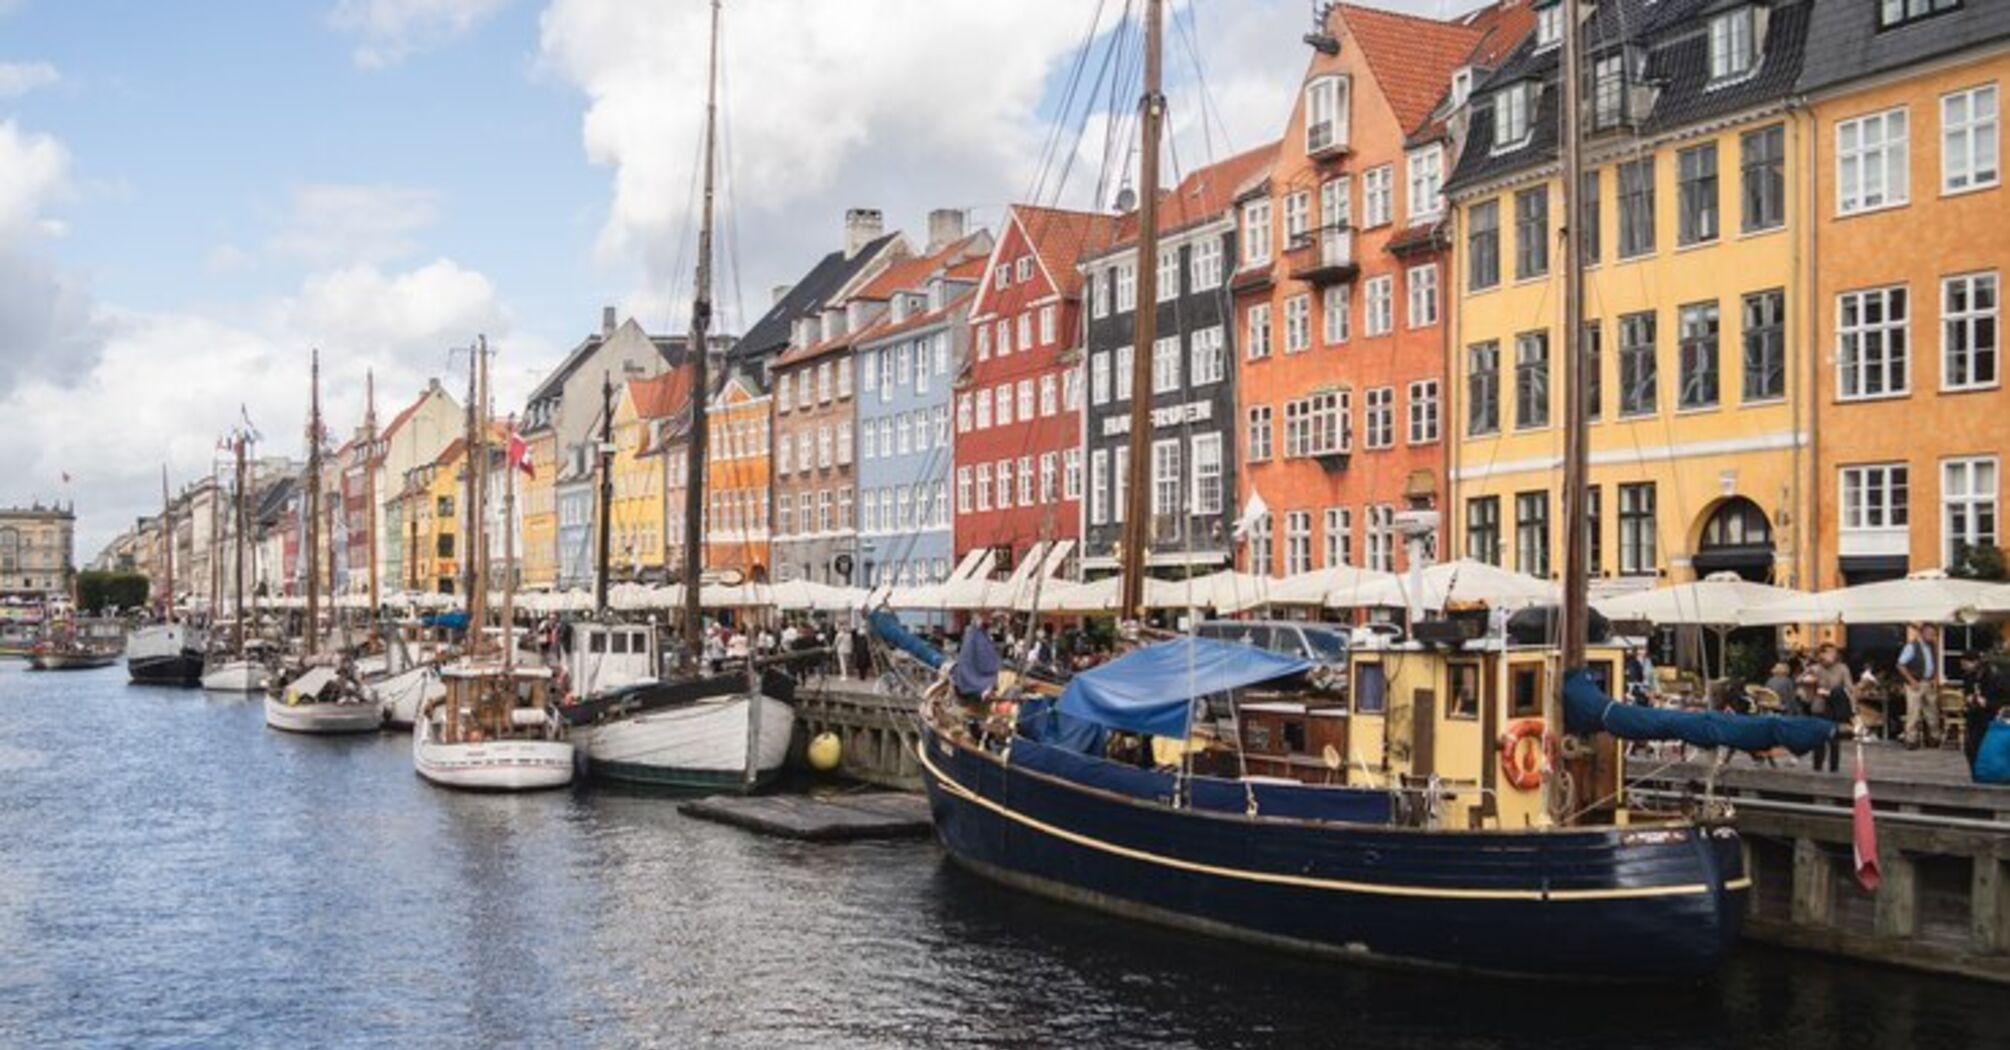 Don't be late and don't mock the queen: tips to help you get through your trip to Denmark